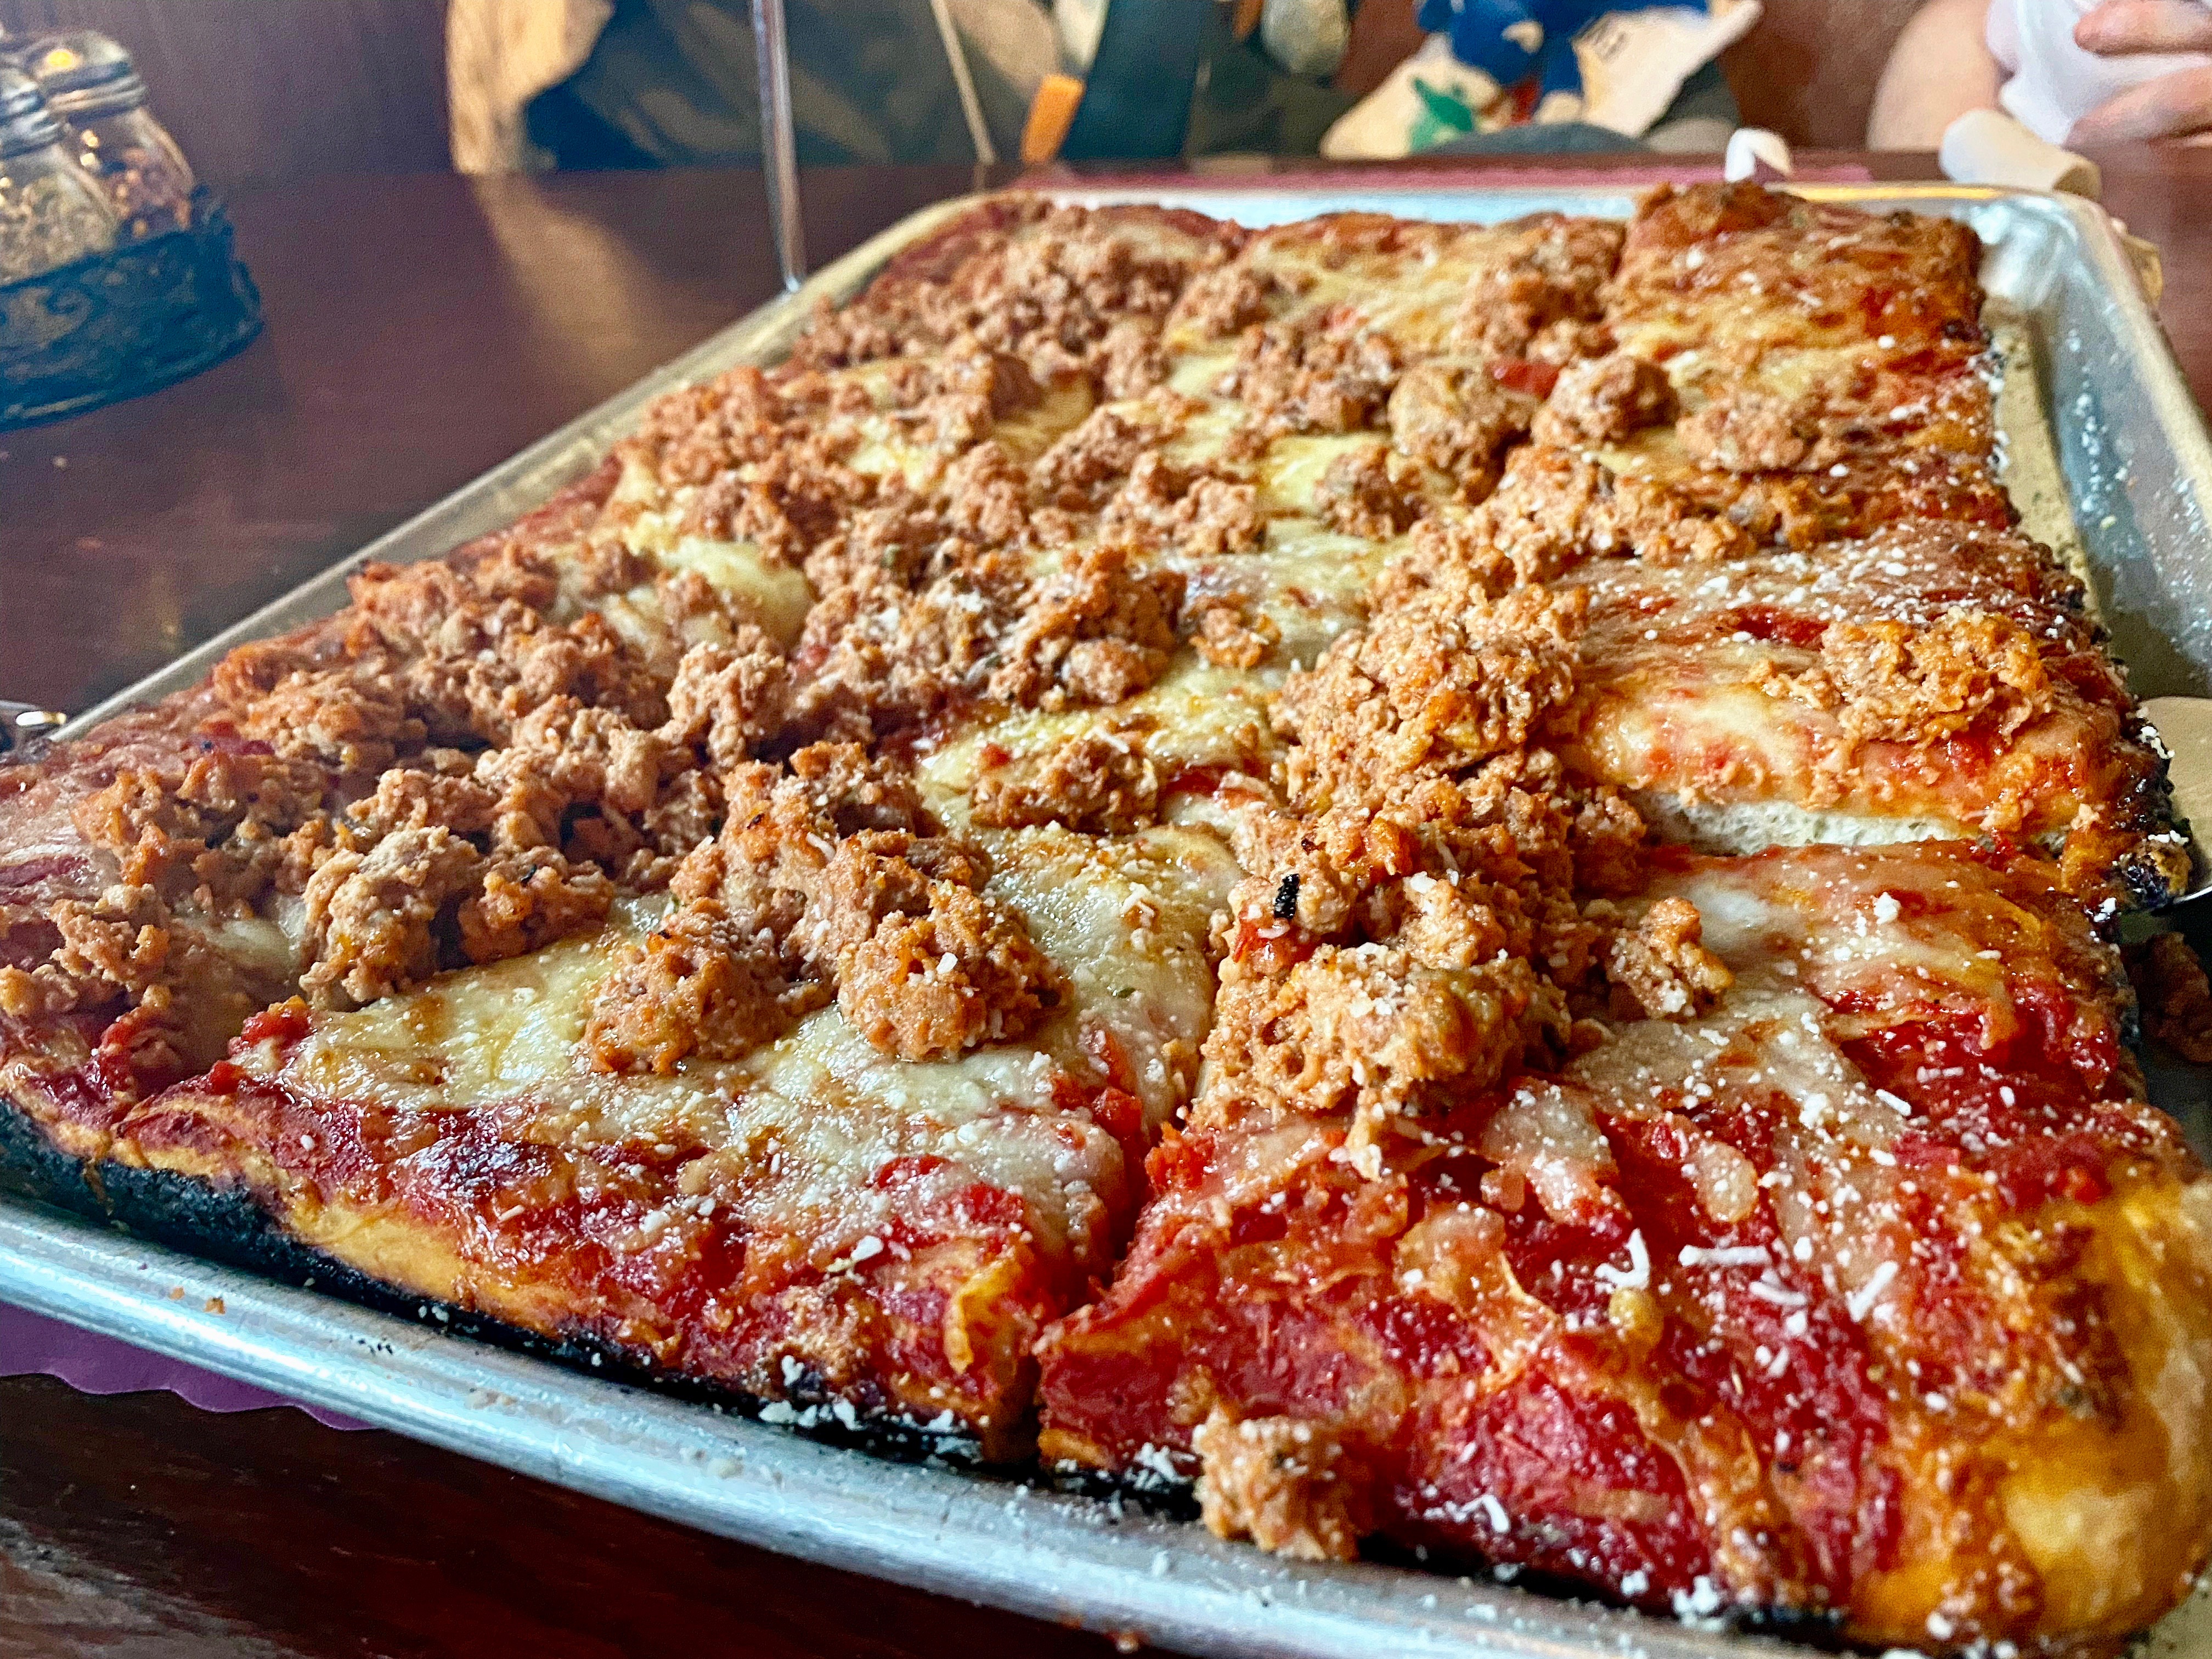 Top 10 “One Bite” Pizza Slices in New Jersey - New Jersey Digest